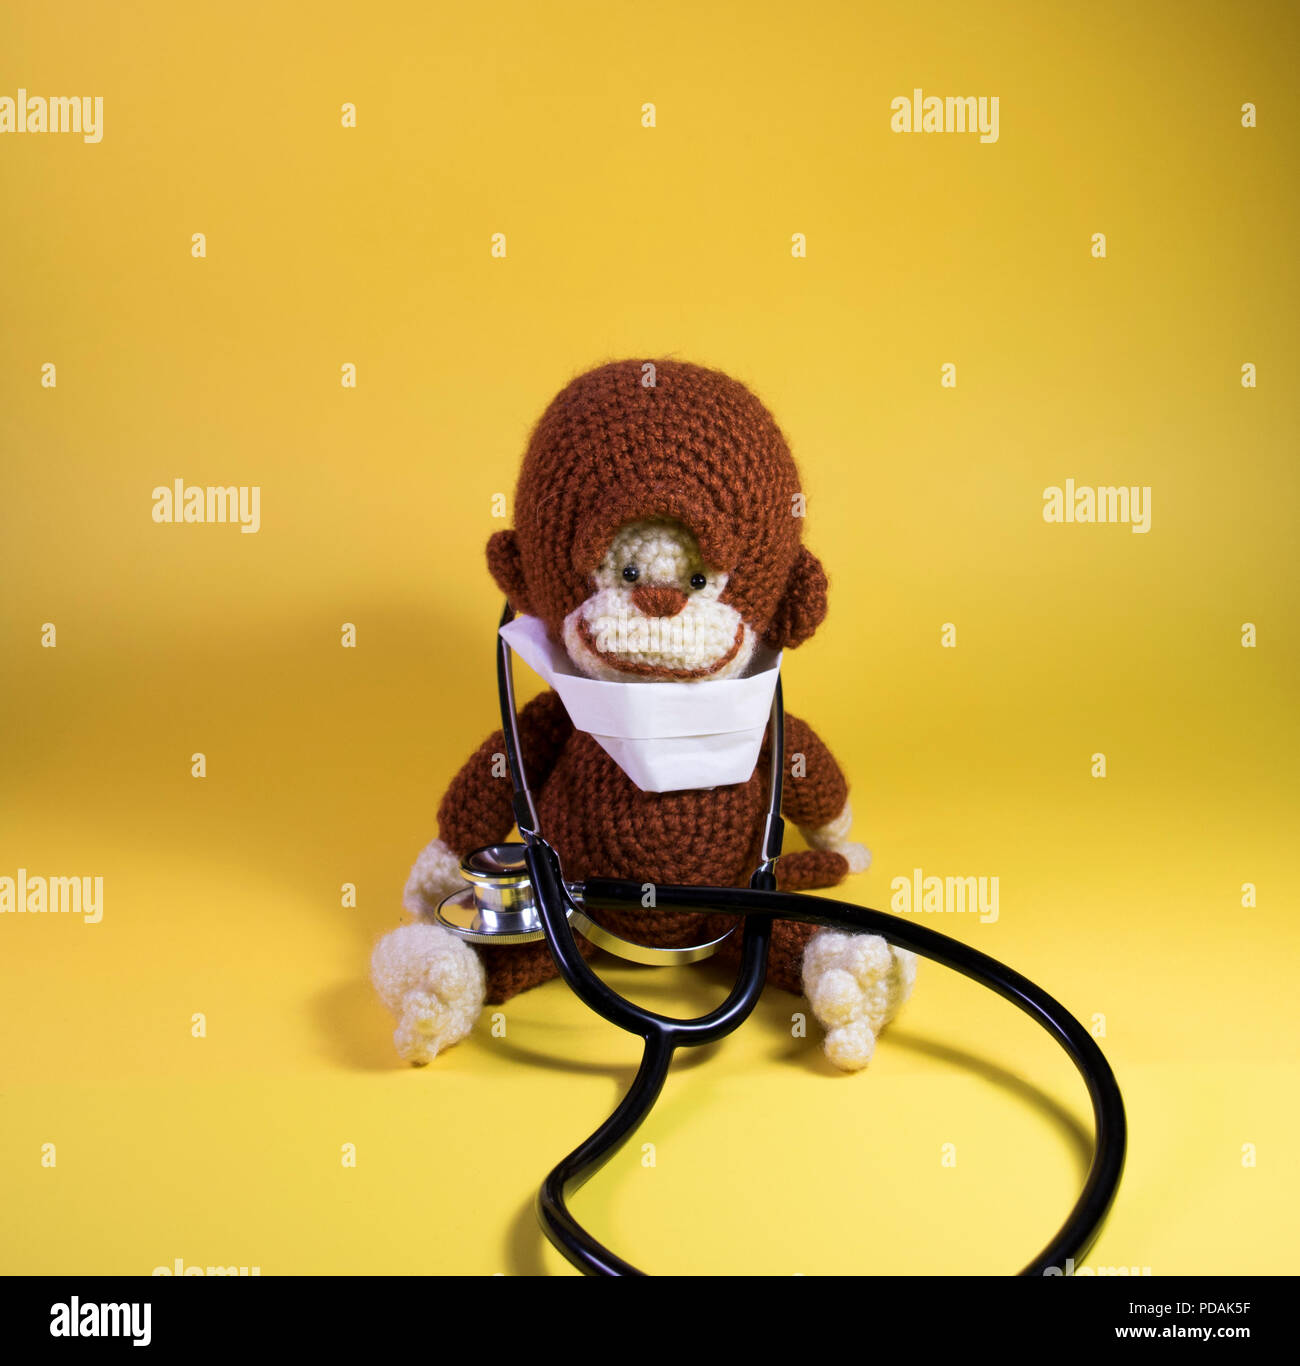 Medical Monkey stuffed toy panoramic. Cute plush brown monkey wearing a hospital mask and doctors stethoscope. Stock Photo